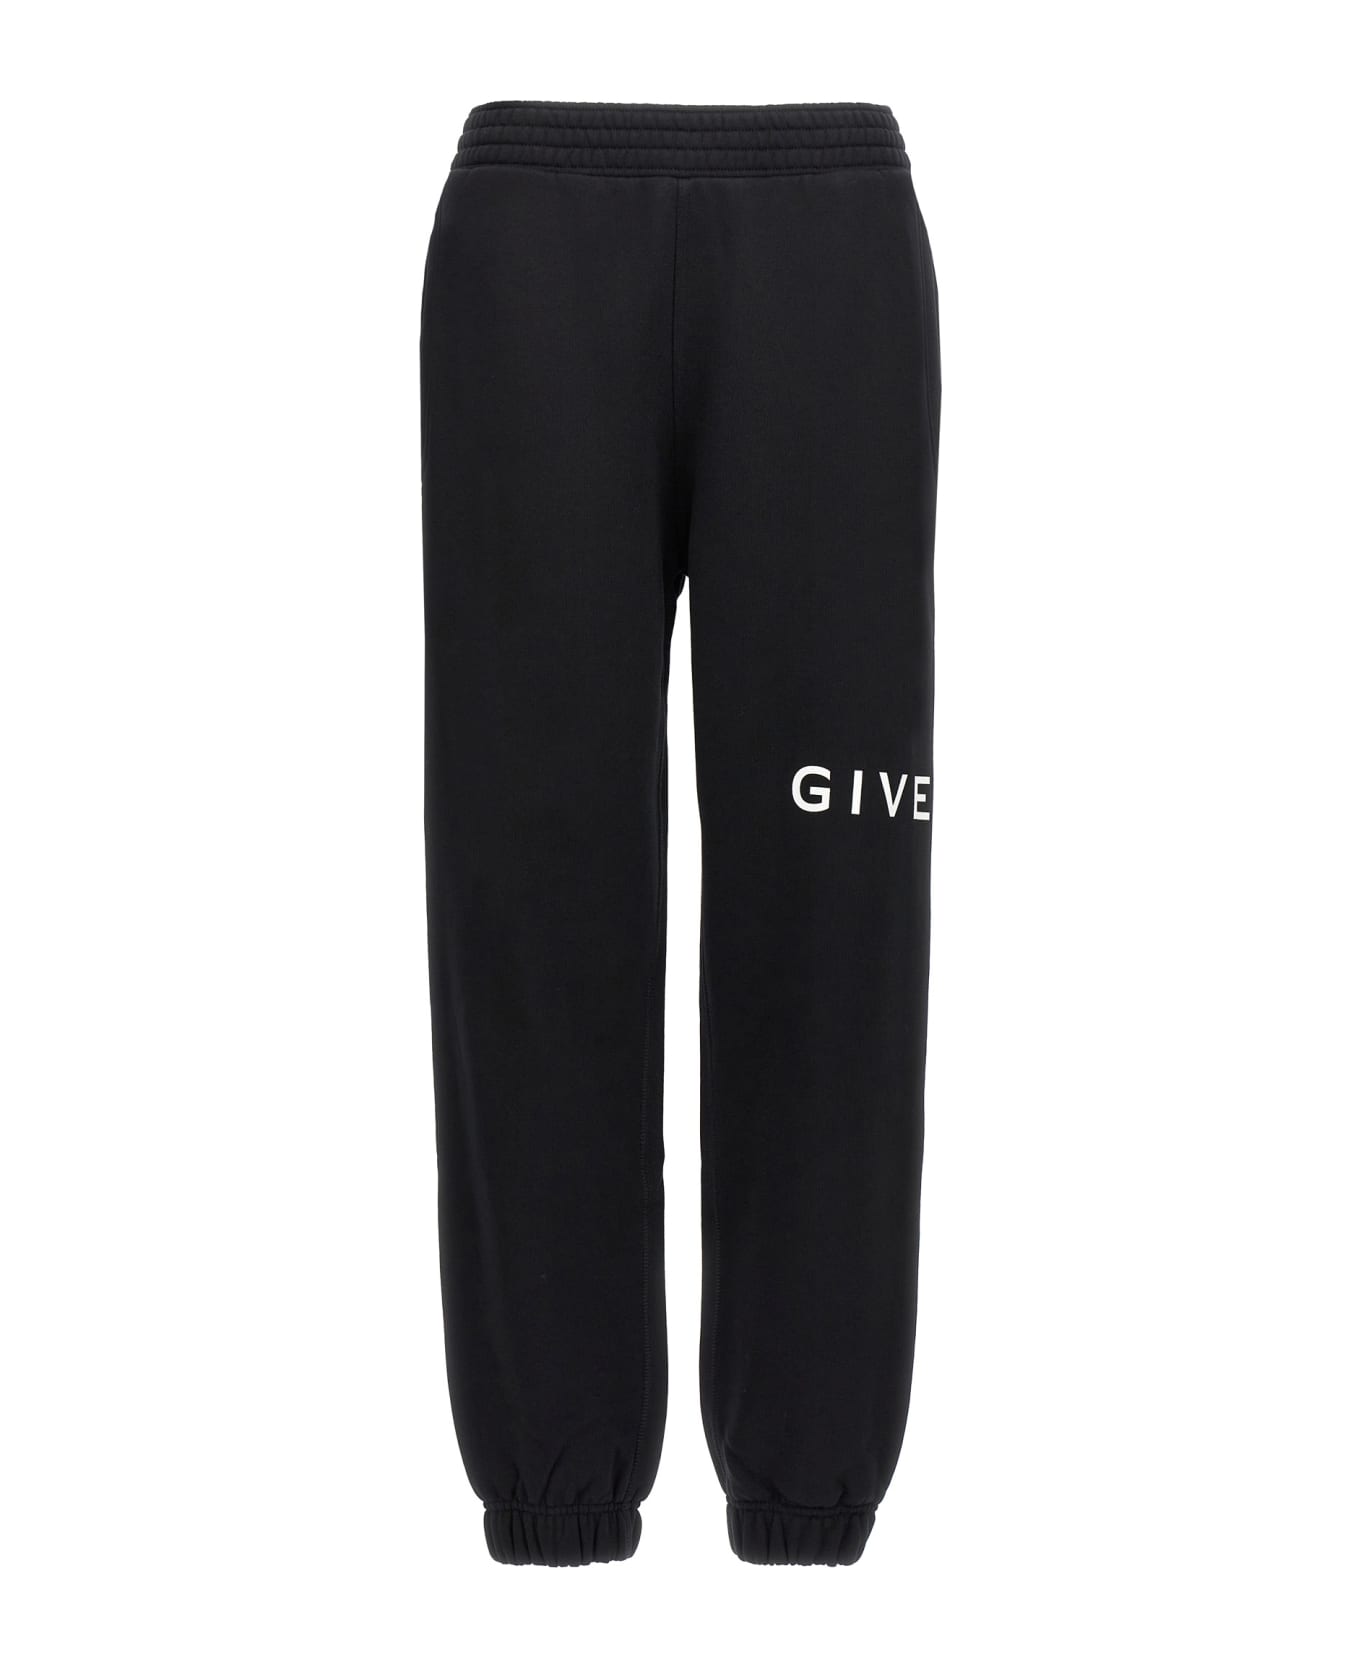 Givenchy Archetype Trousers - Black スウェットパンツ